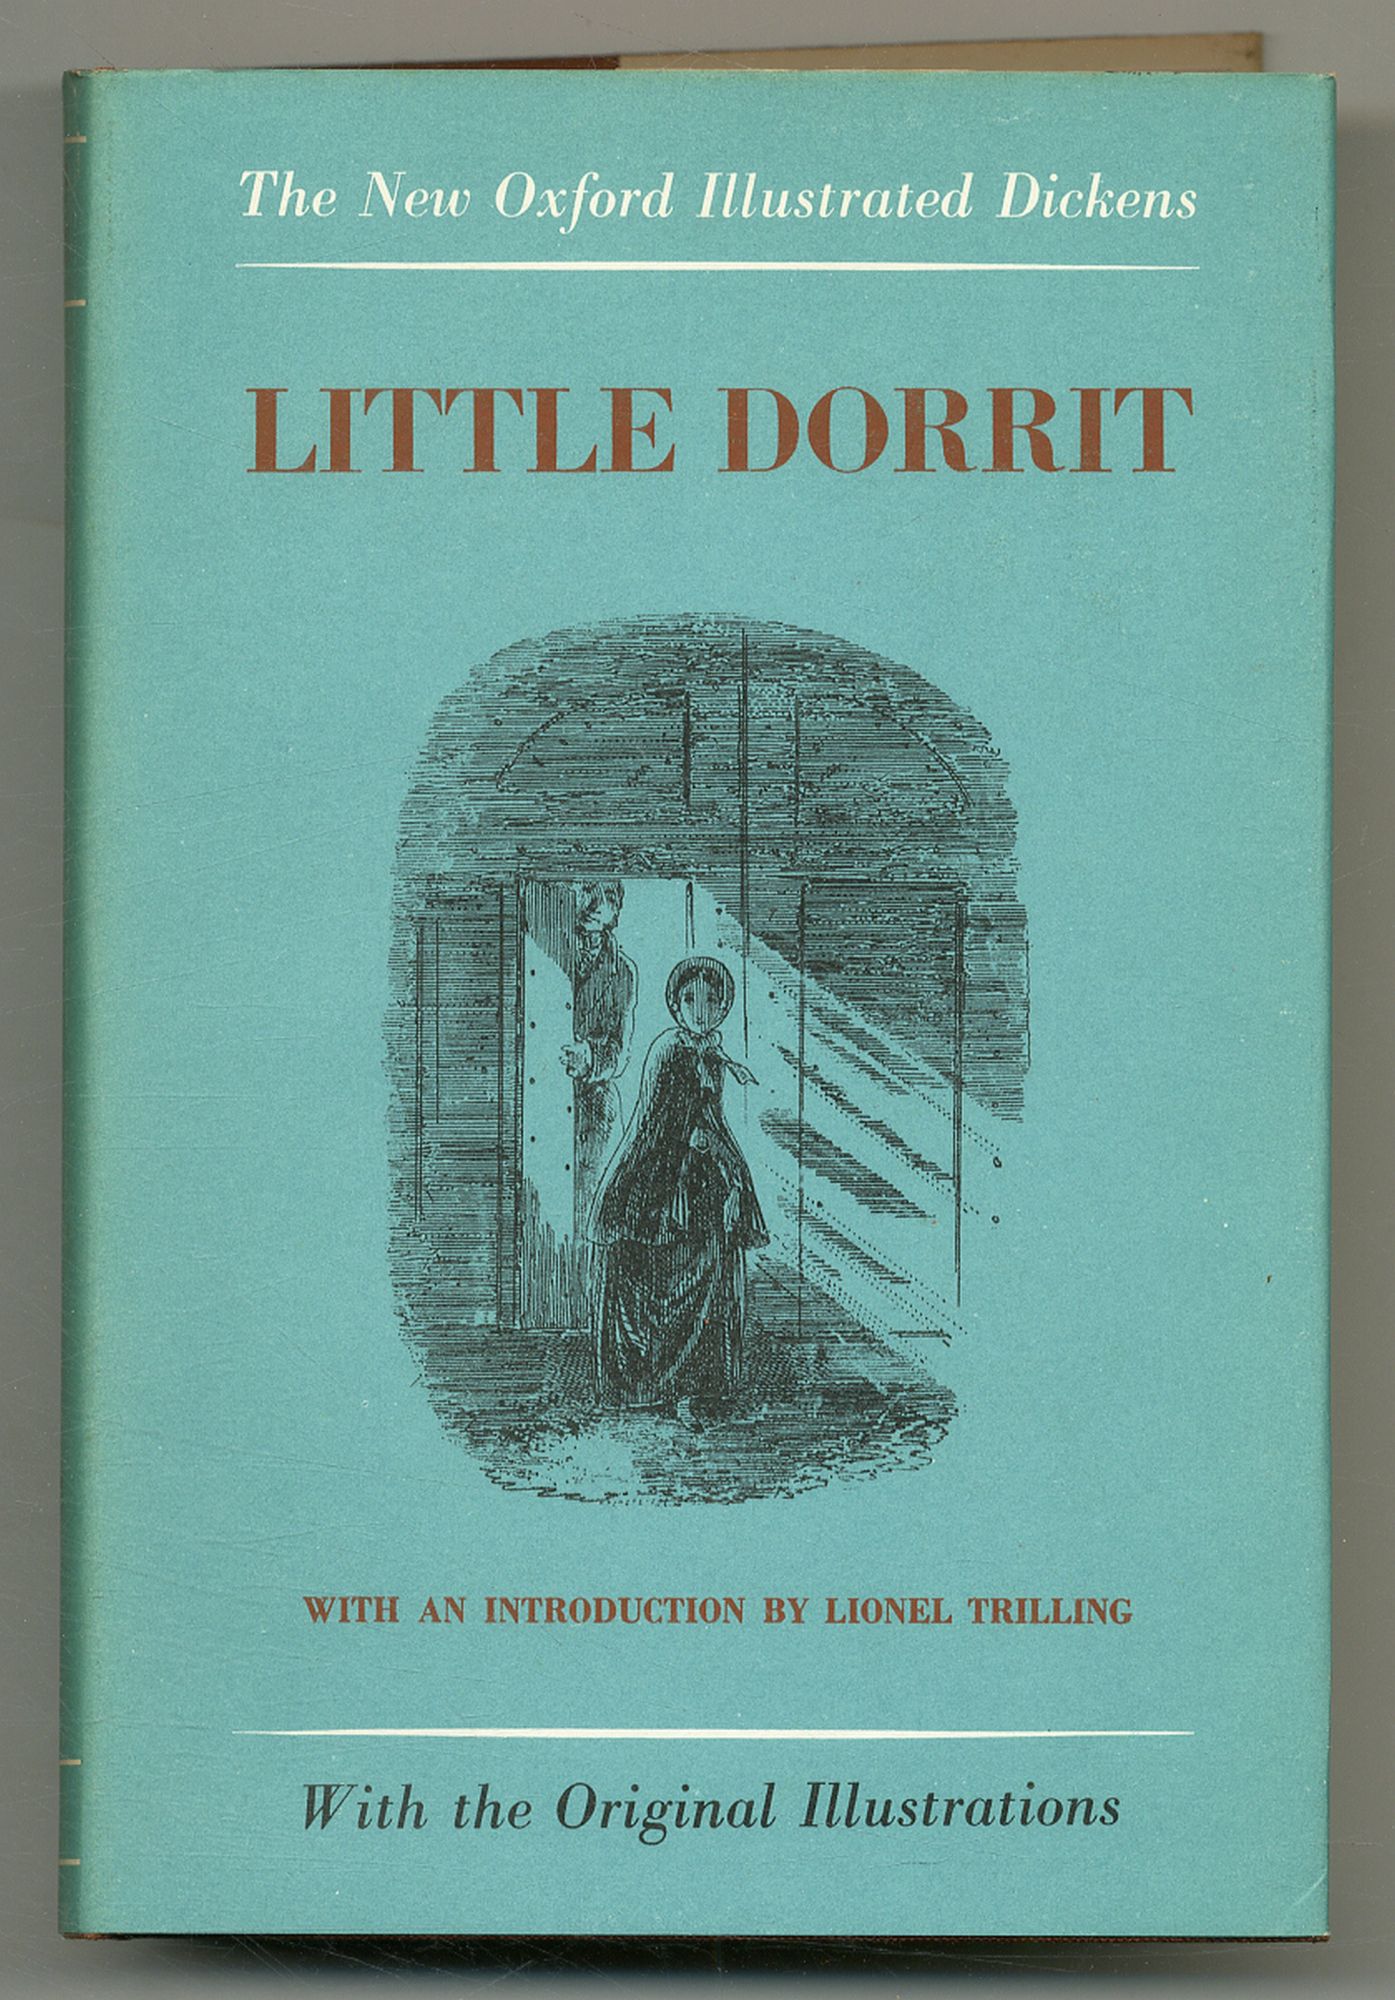 Little Dorrit (The New Oxford Illustrated Dickens) - DICKENS, Charles